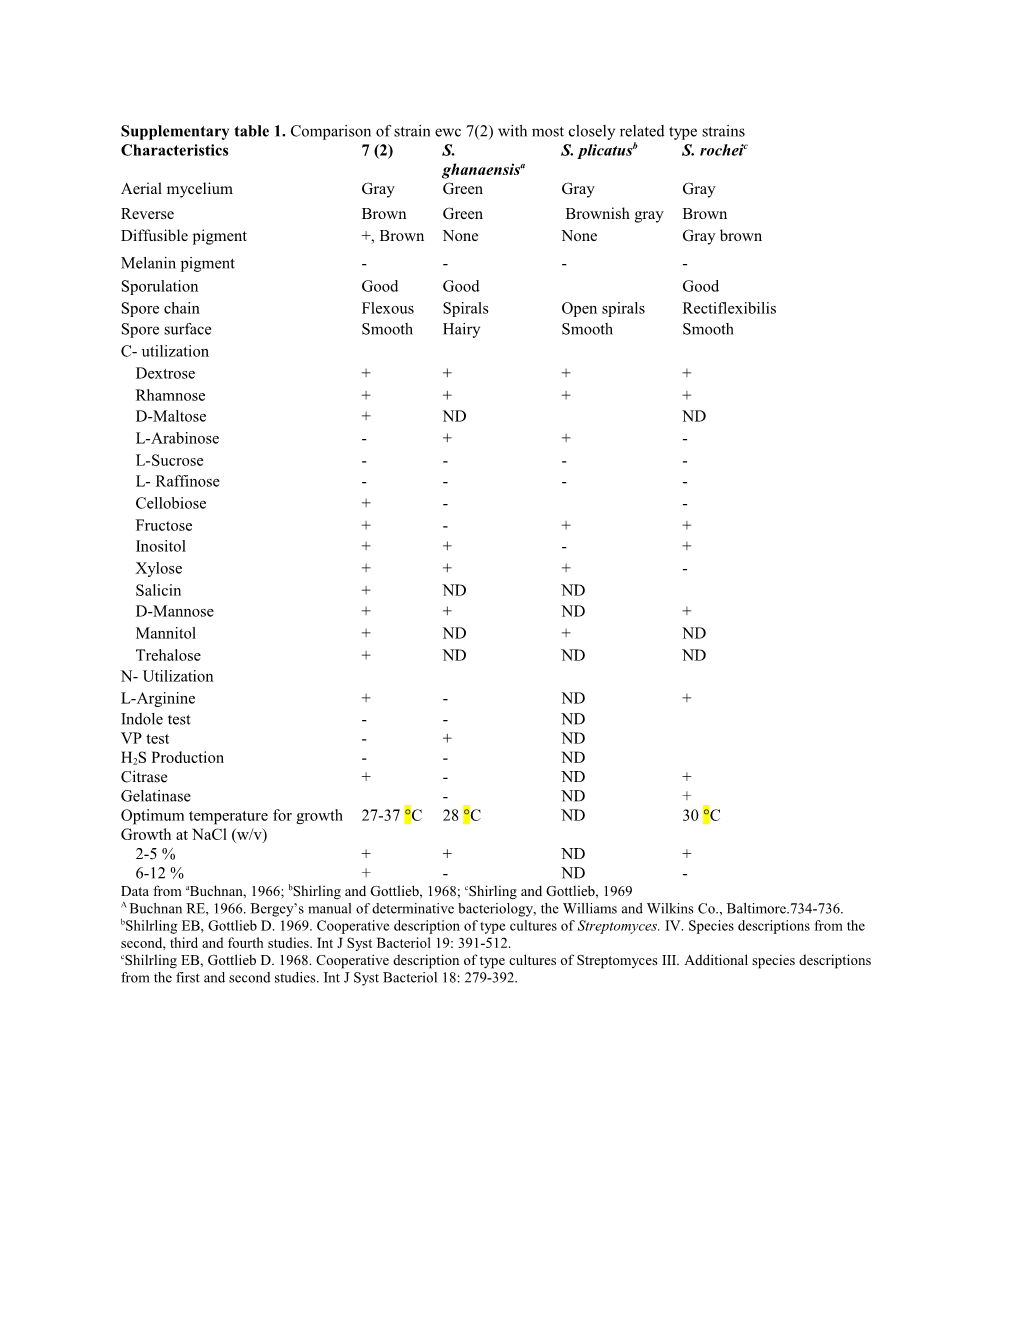 Supplementary Table 1. Comparison of Strain Ewc 7(2) with Most Closely Related Type Strains